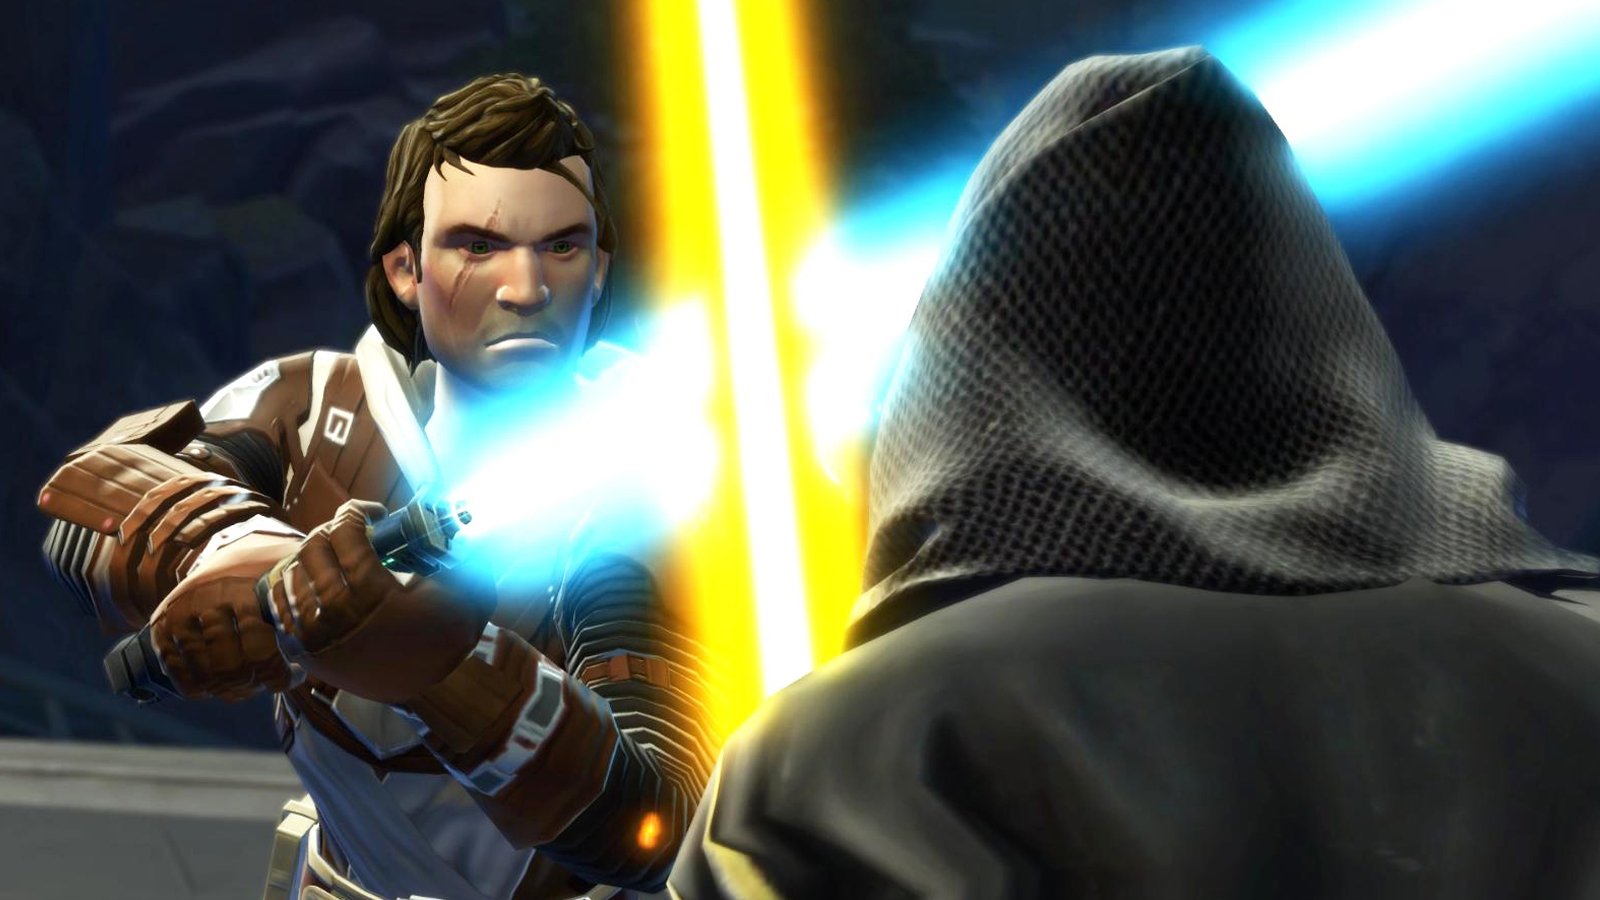 EA took a lot of heat at the time for SWTOR, but Schubert led the F2P transition masterfully